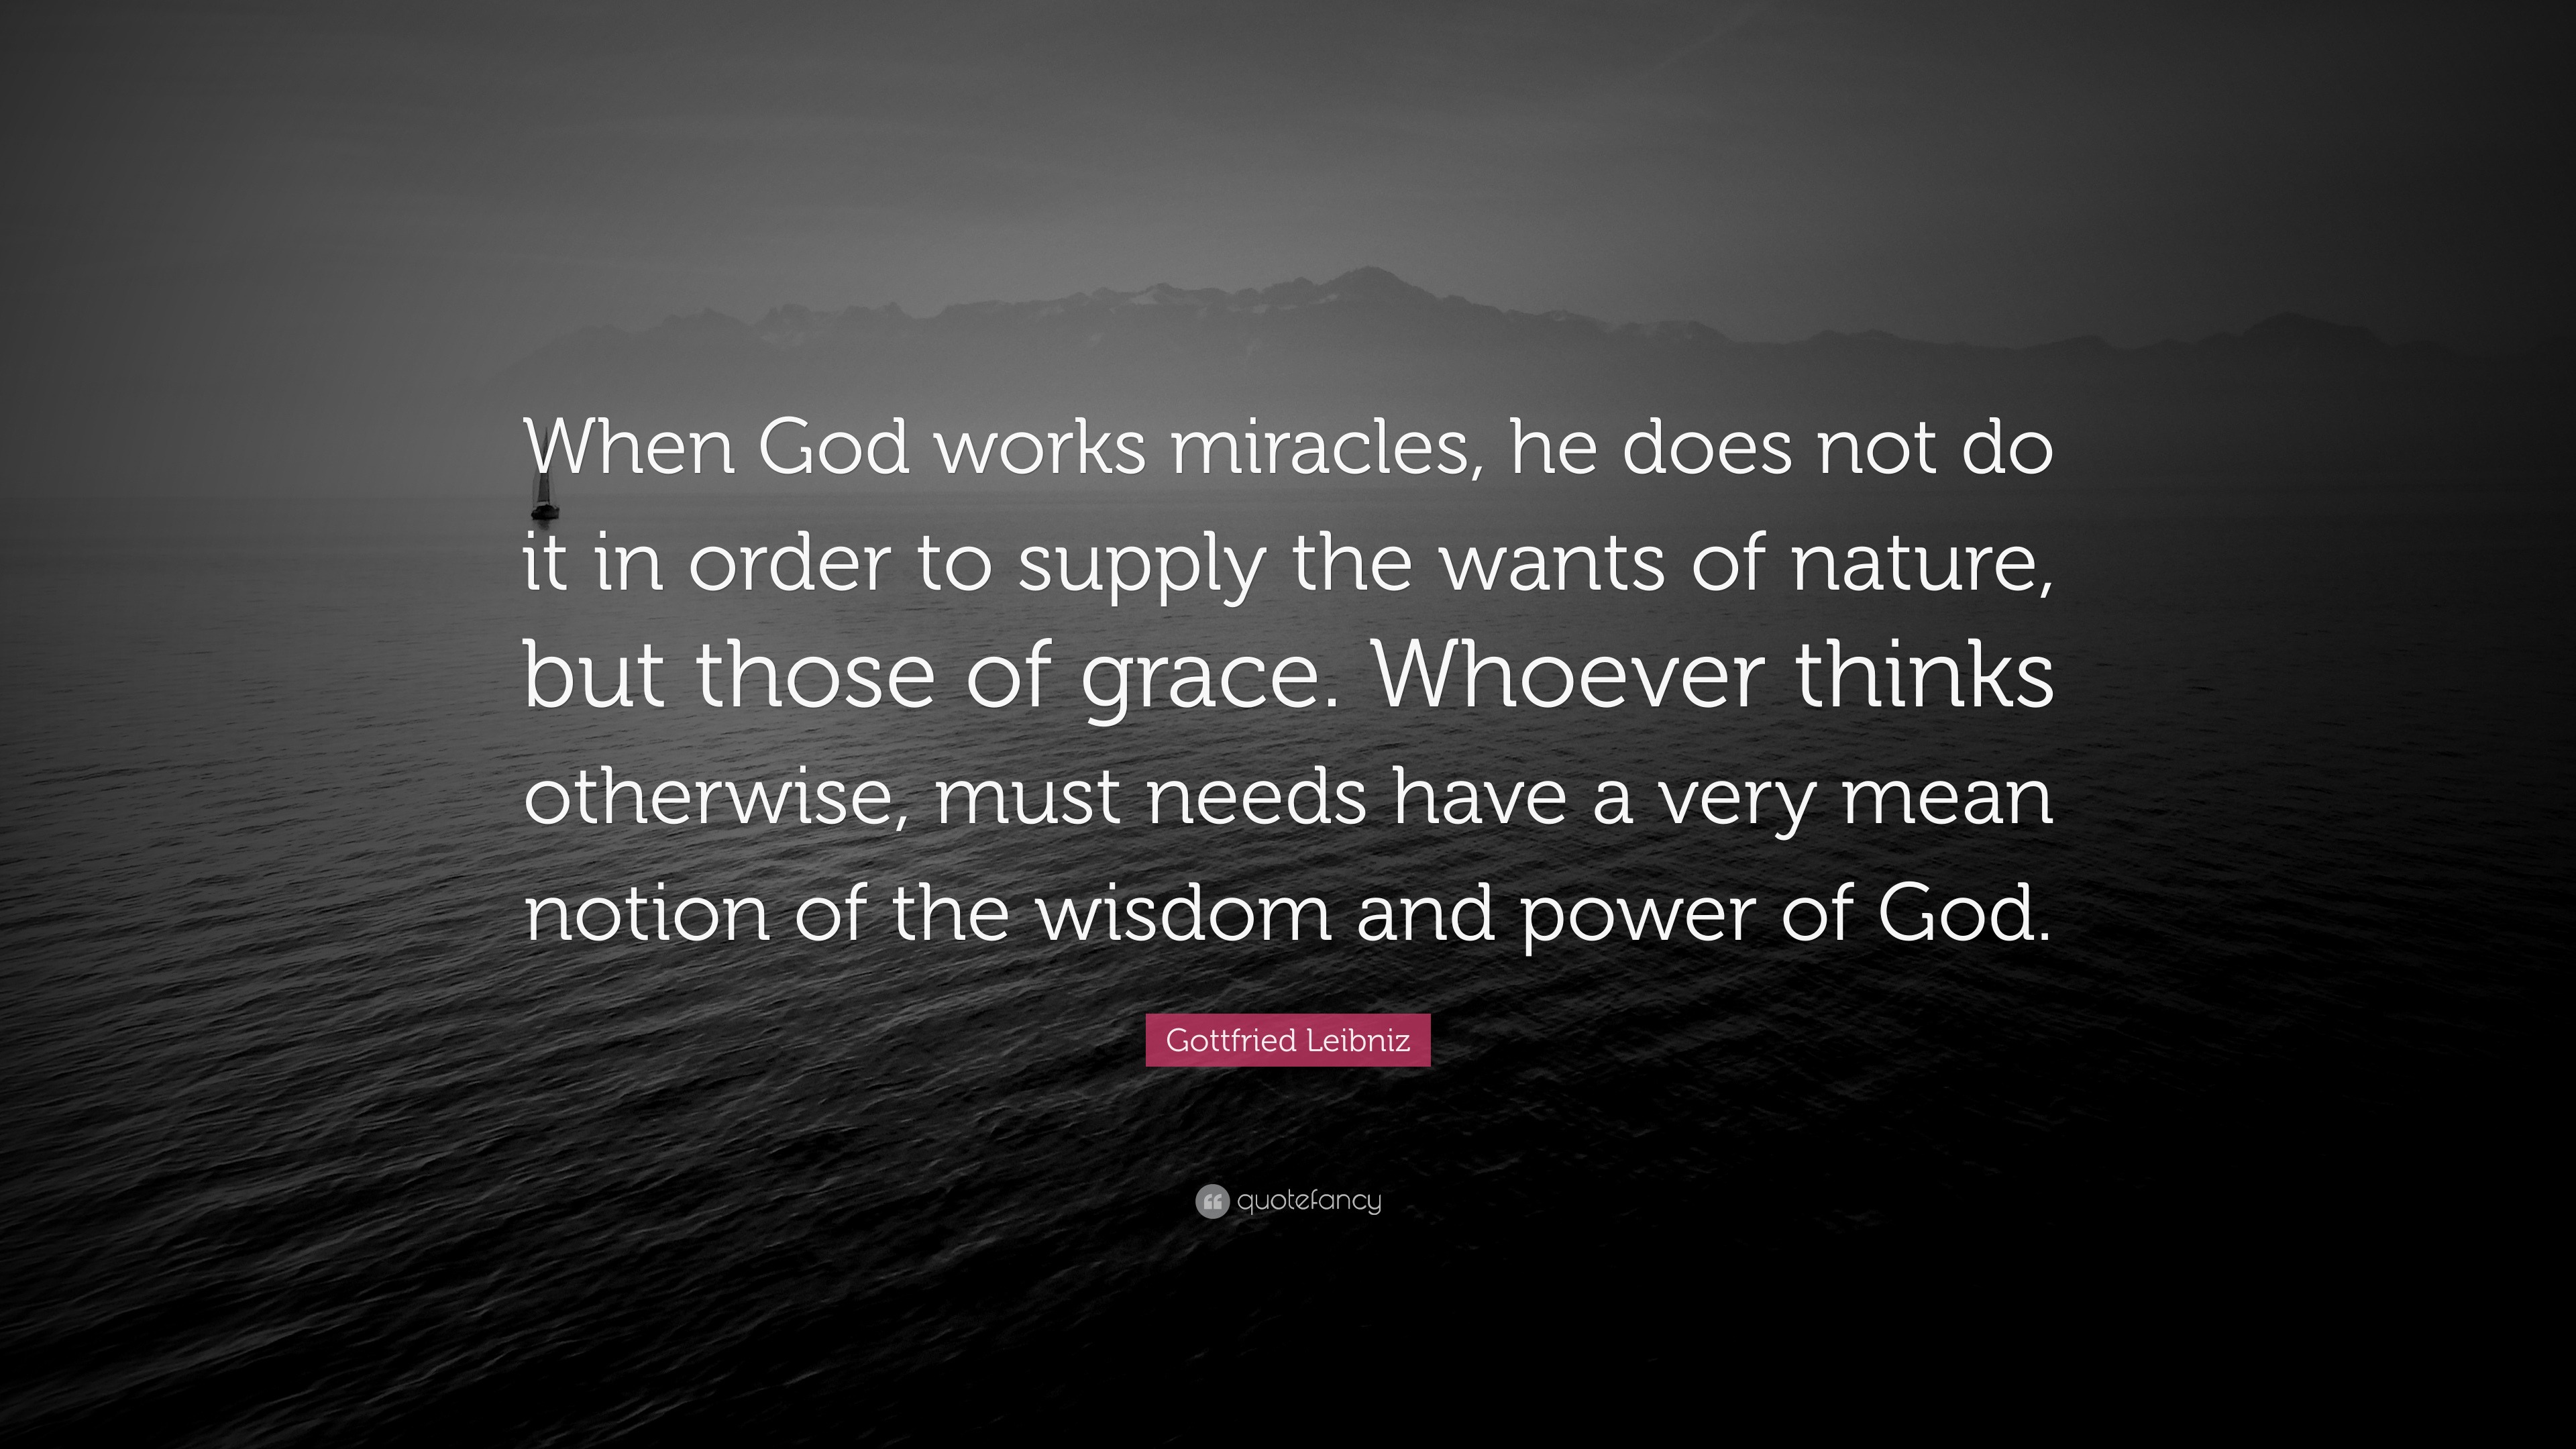 Gottfried Leibniz Quote: "When God works miracles, he does ...